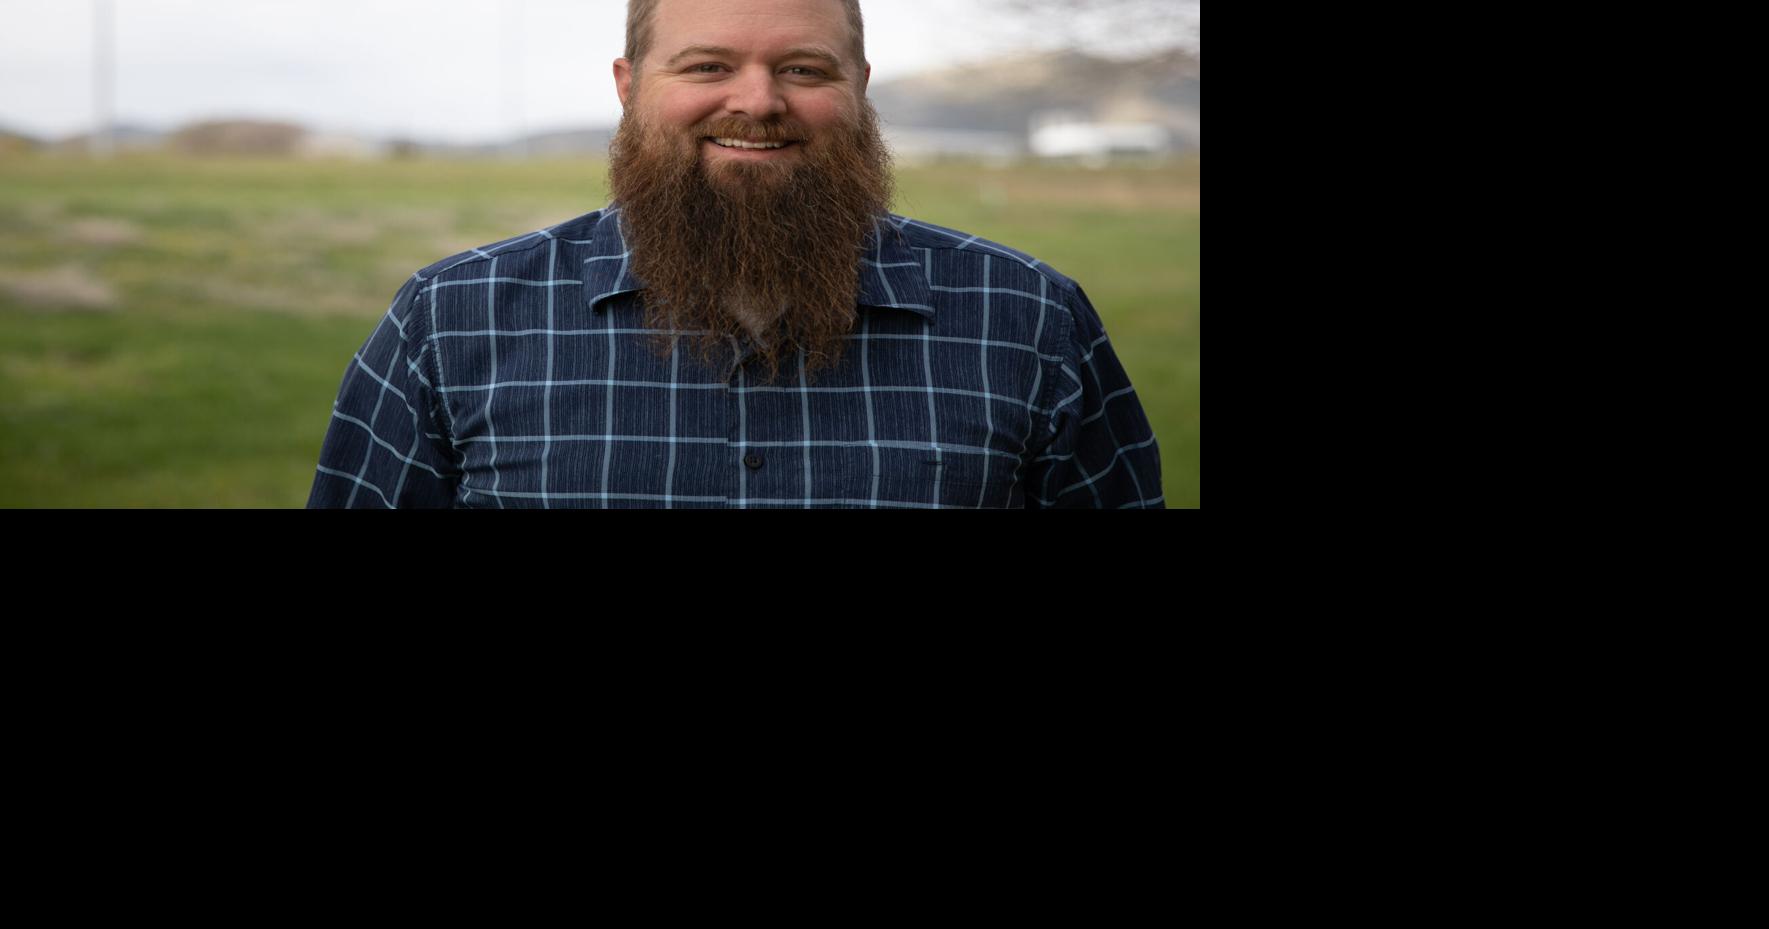 East Helena school board candidate Tyrel Murfitt promotes good work within district Photo